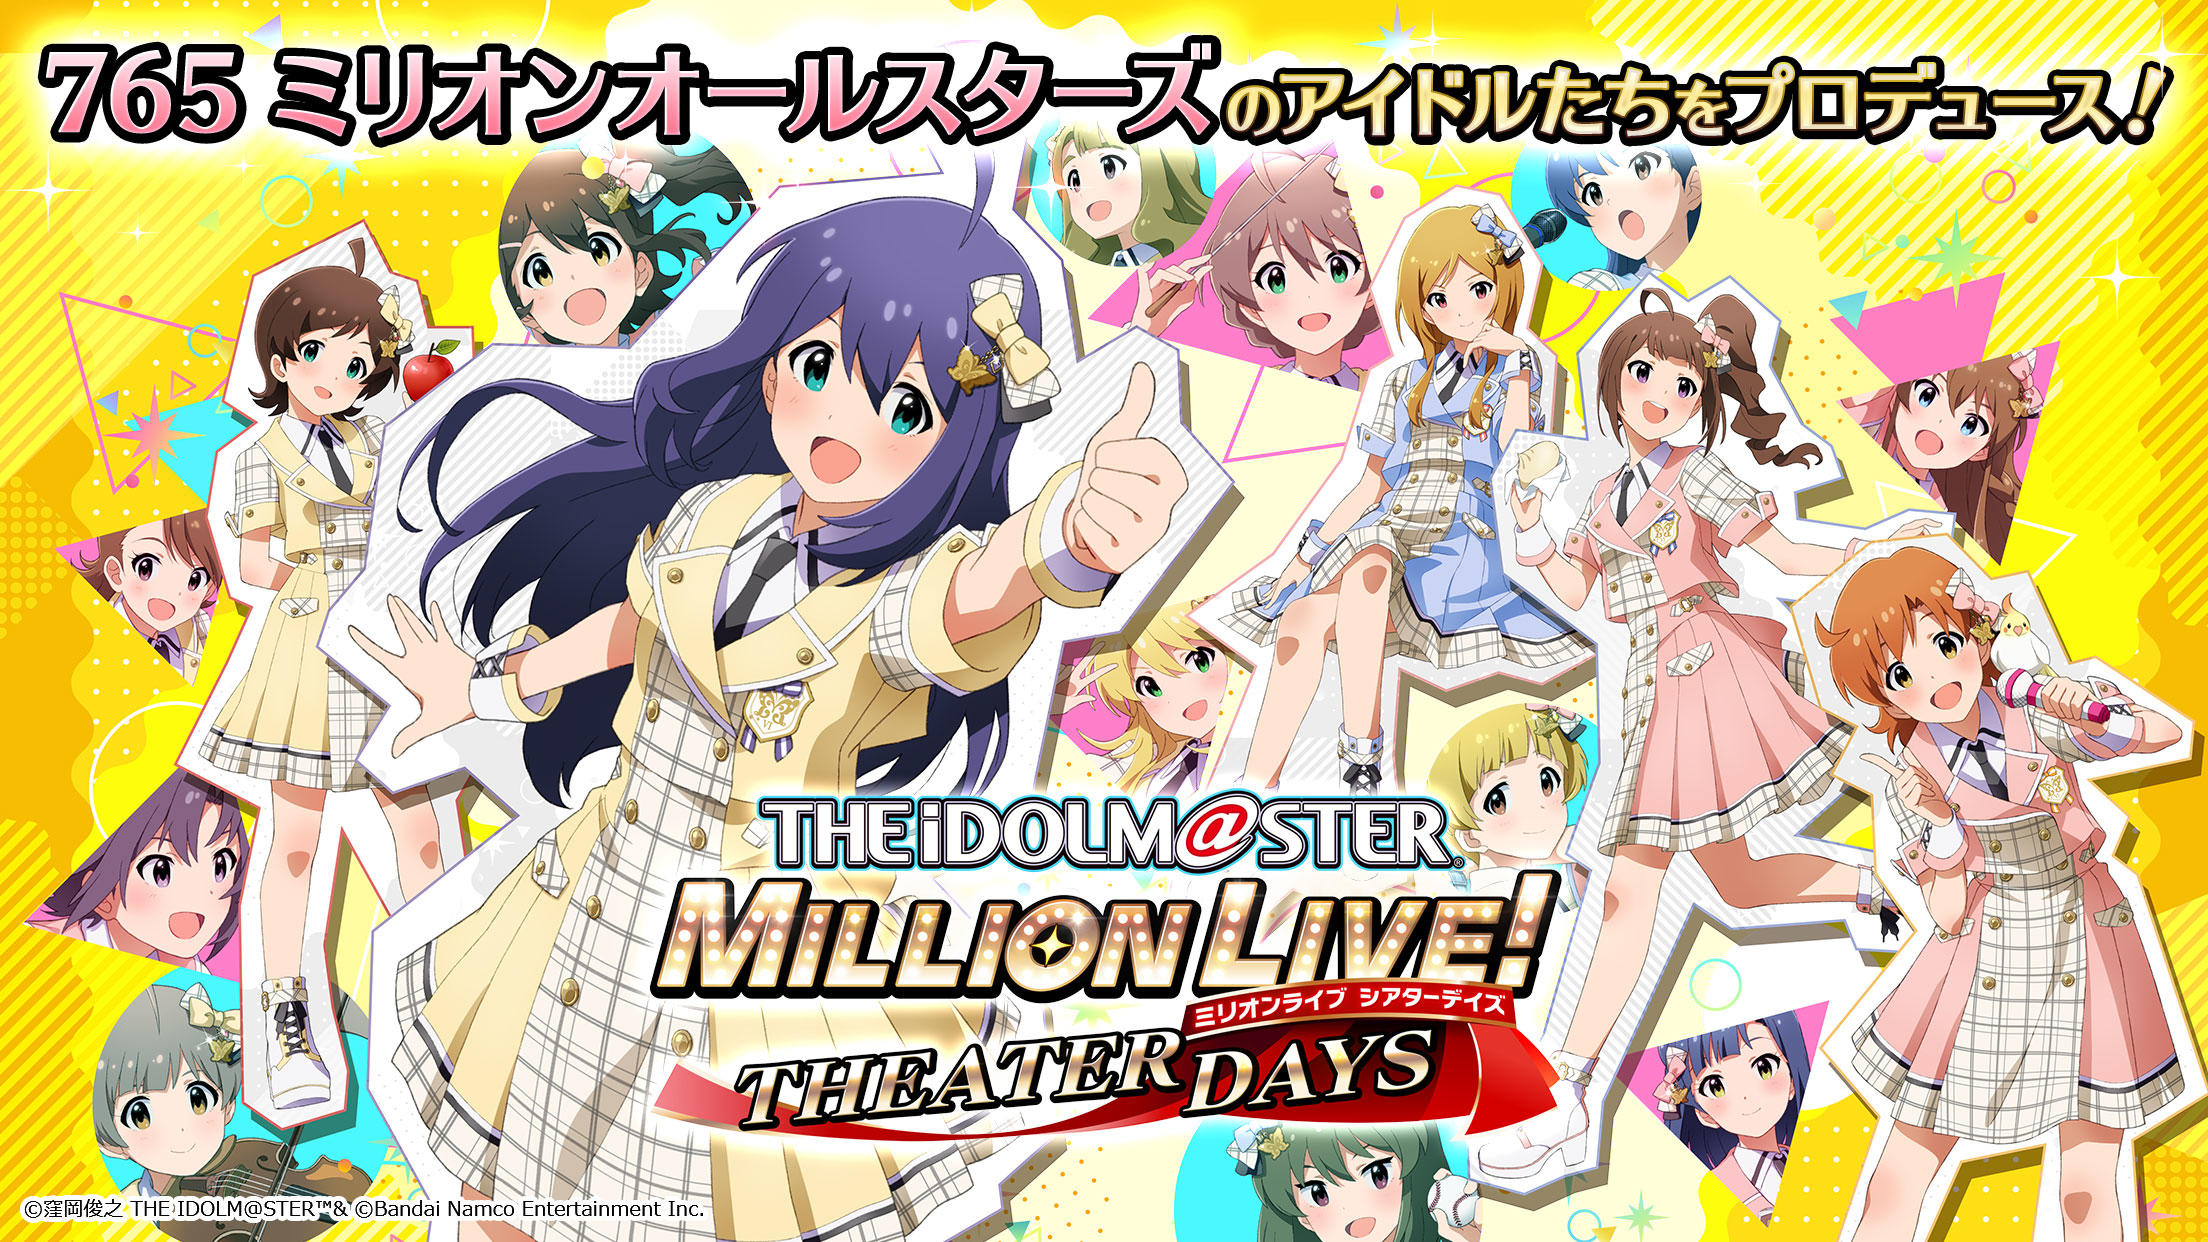 Screenshot 1 of THE IDOLM@STER MILLION LIVE! THEATER DAYS 6.1.300